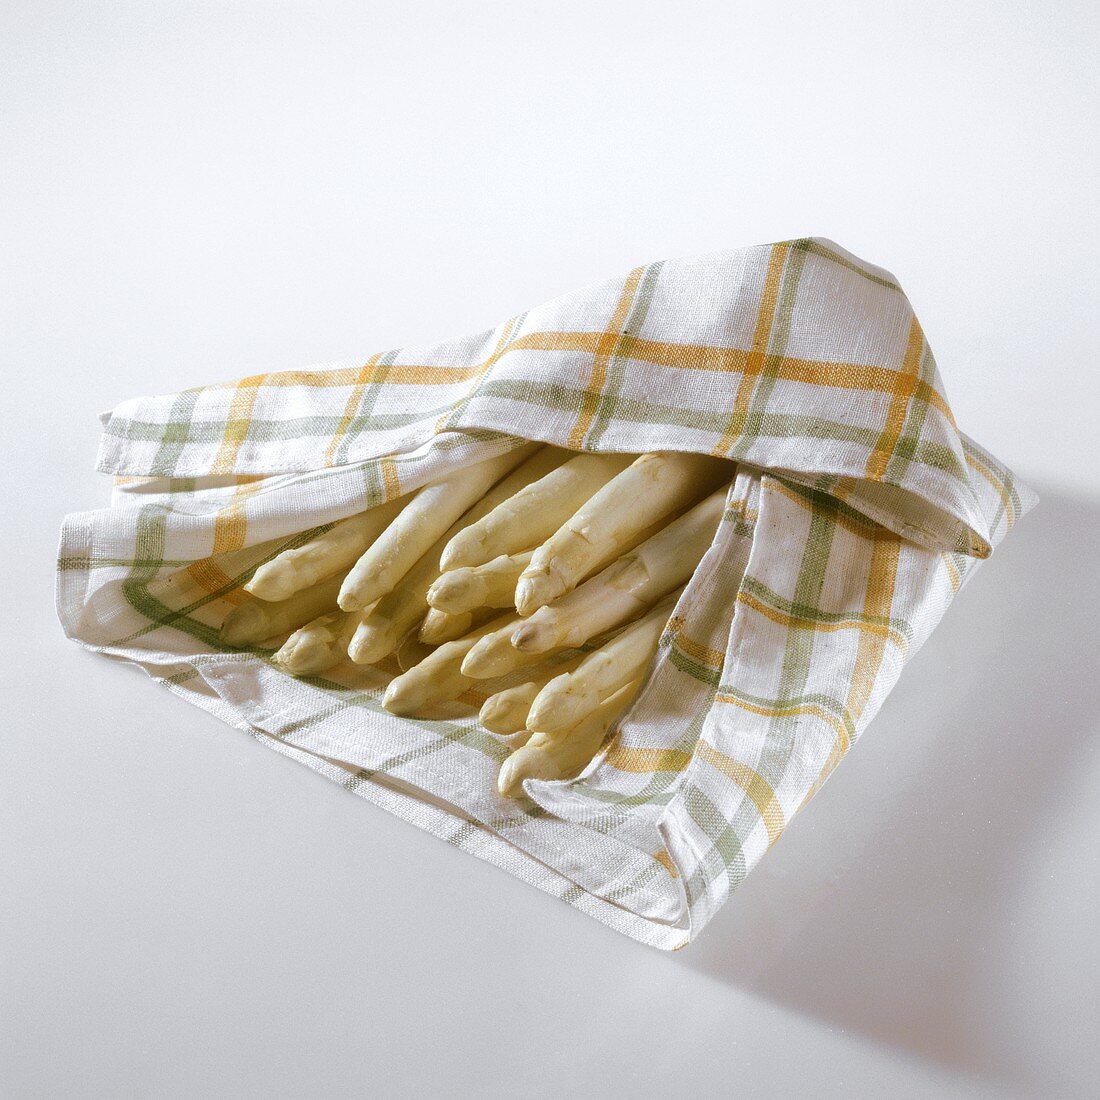 Asparagus wrapped in kitchen cloth (keeps fresh longer)